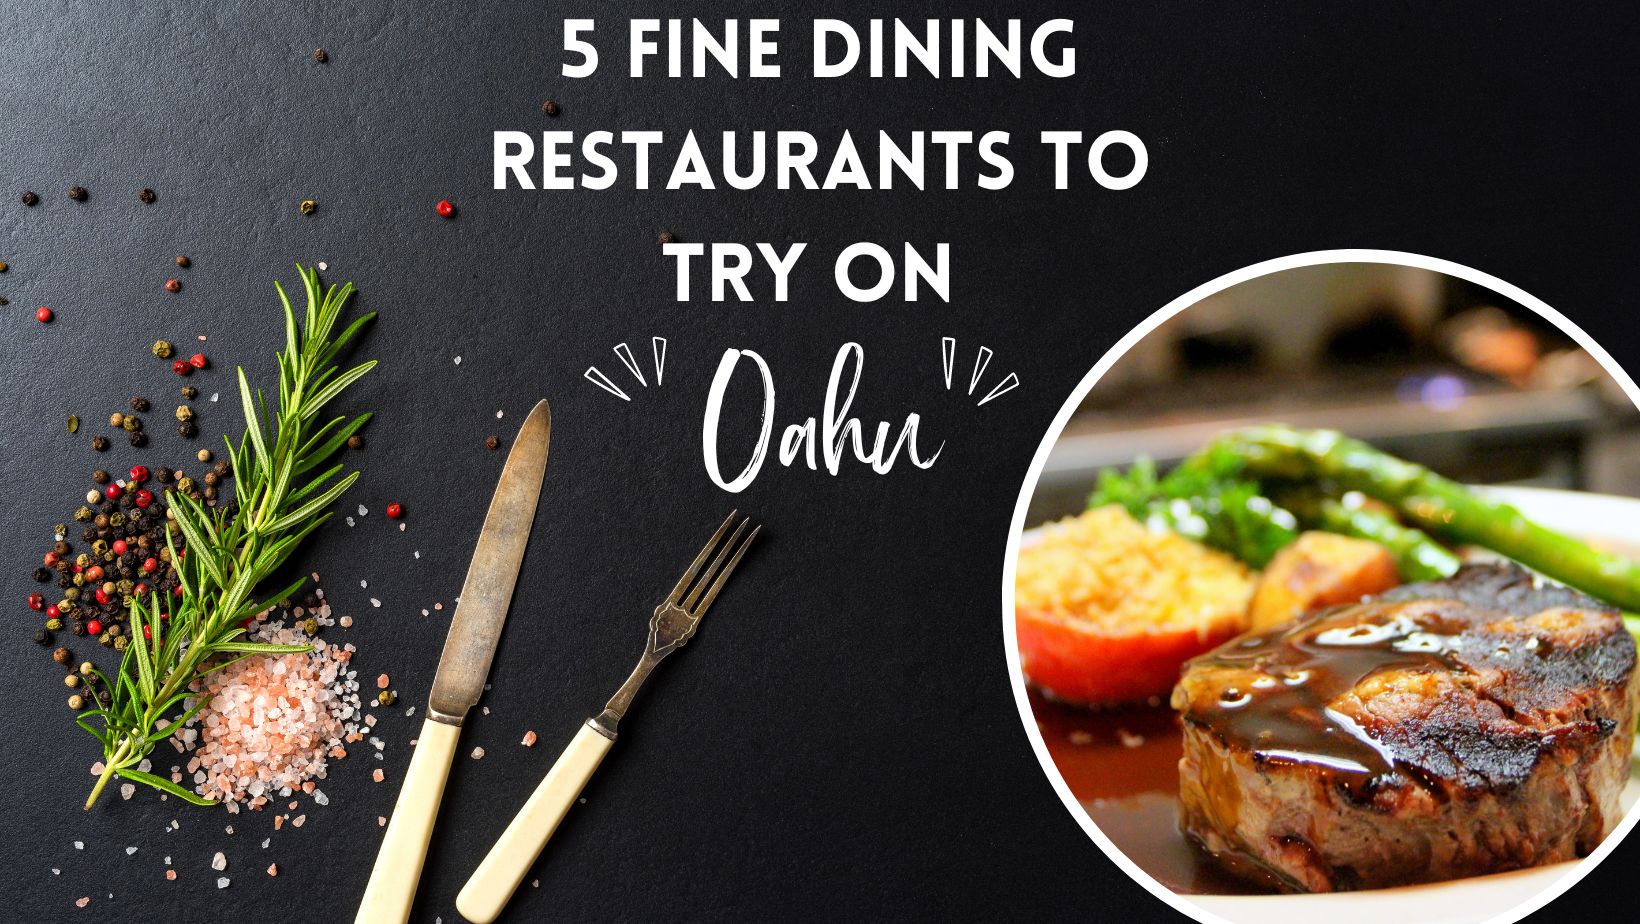 5 Fine Dining Restaurants to Try on Oahu